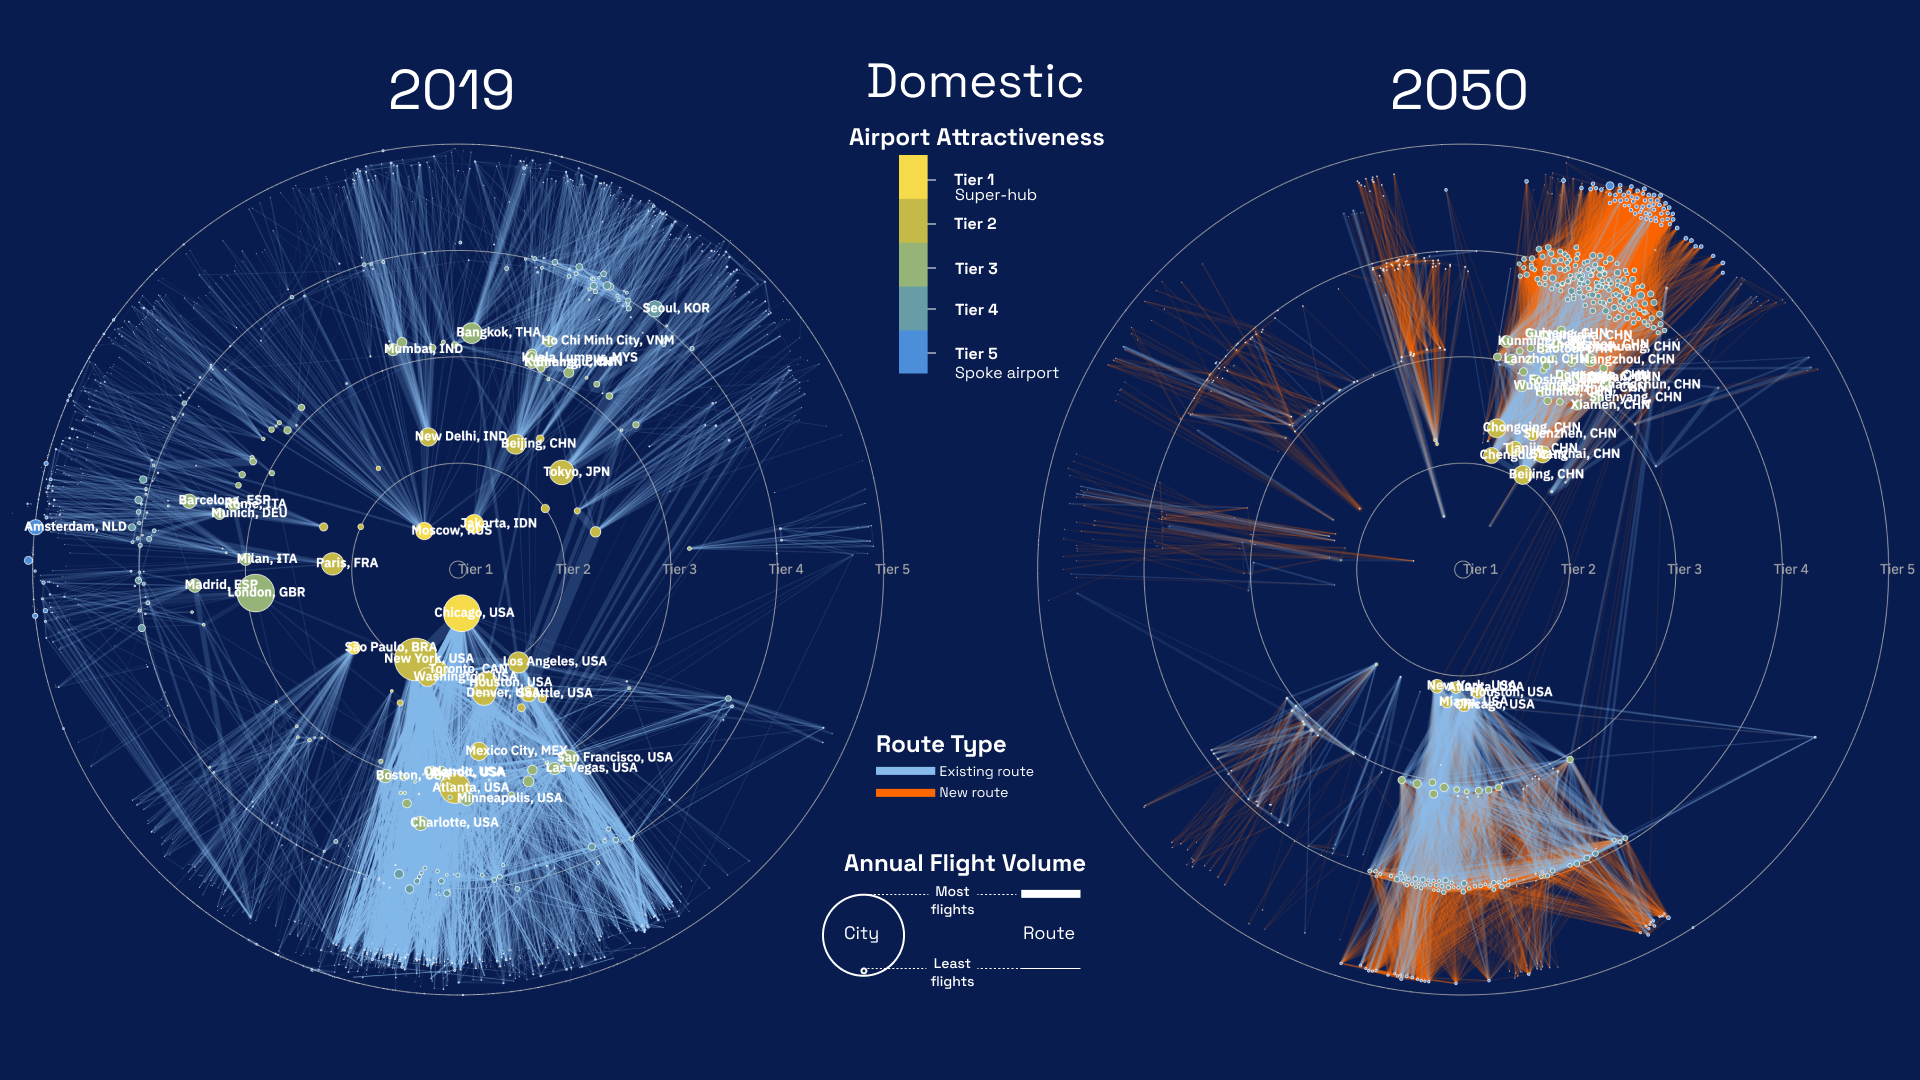 Domestic network charts of international aviation networks. Left: 2019, Right: 2050, showing new connections.